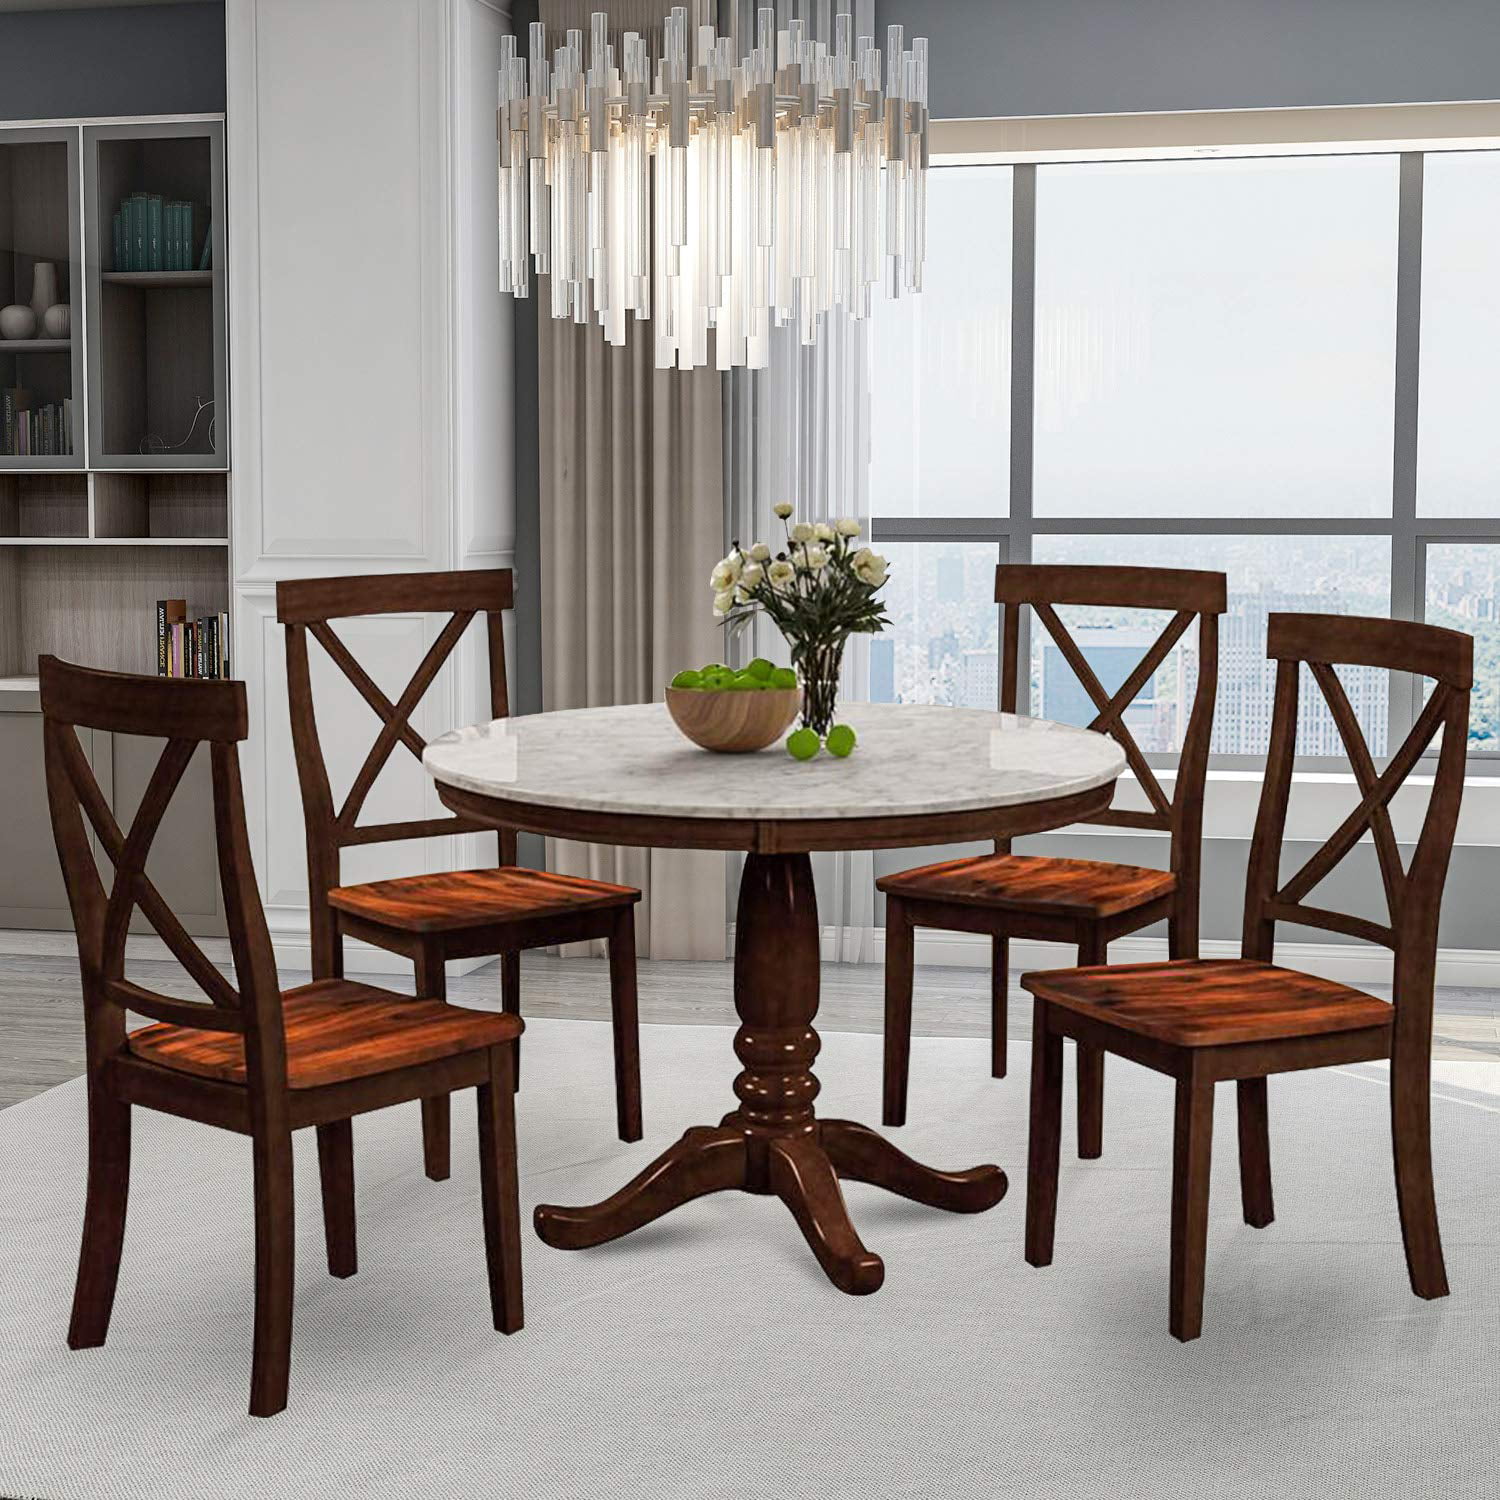 Wooden Circle Kitchen Dining Table Set, Small Round Dining Room Table With 4 Chairs